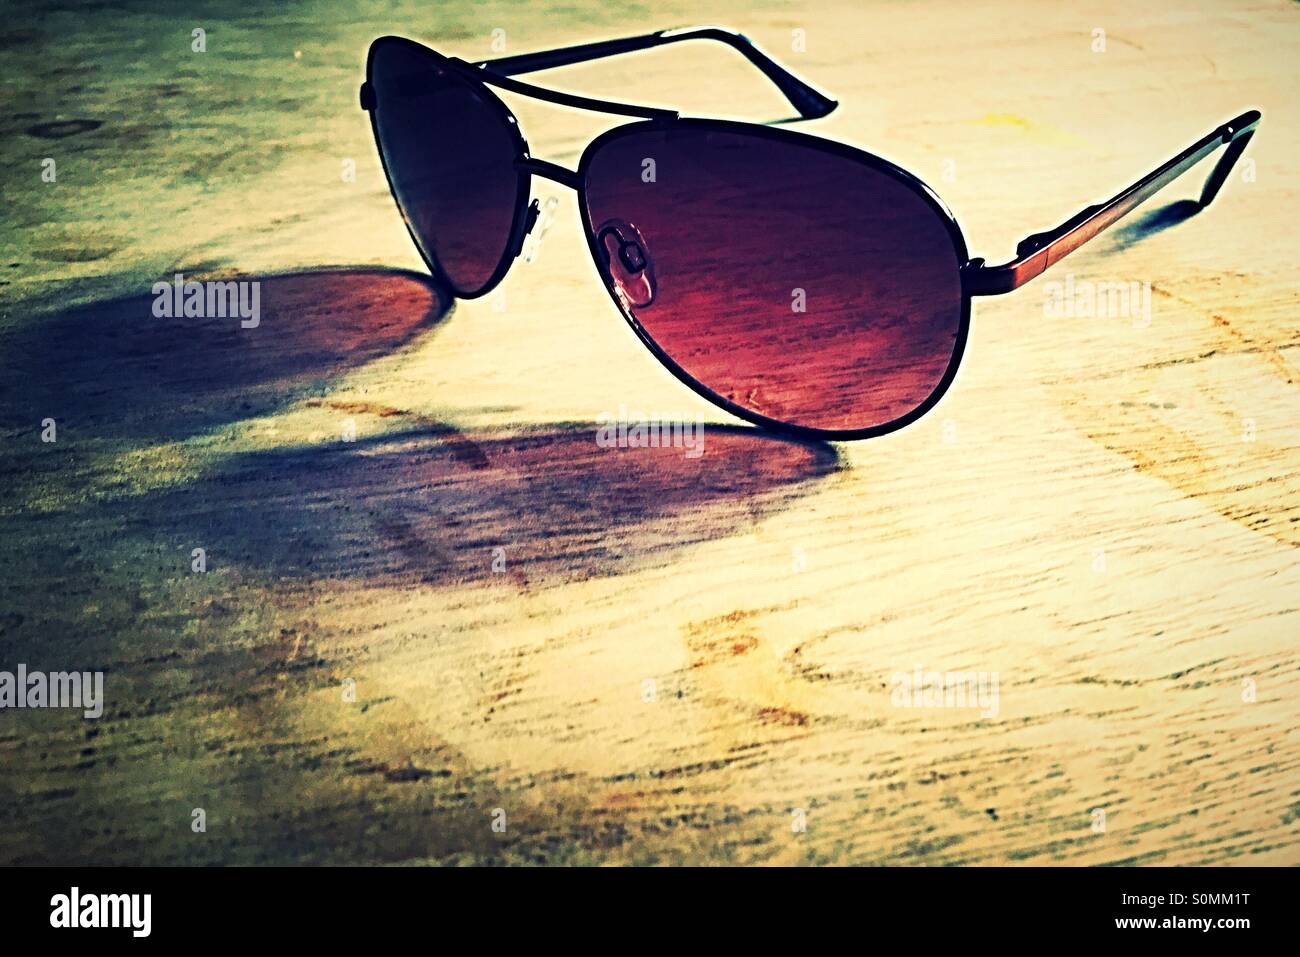 Sunglasses on a wooden table Stock Photo